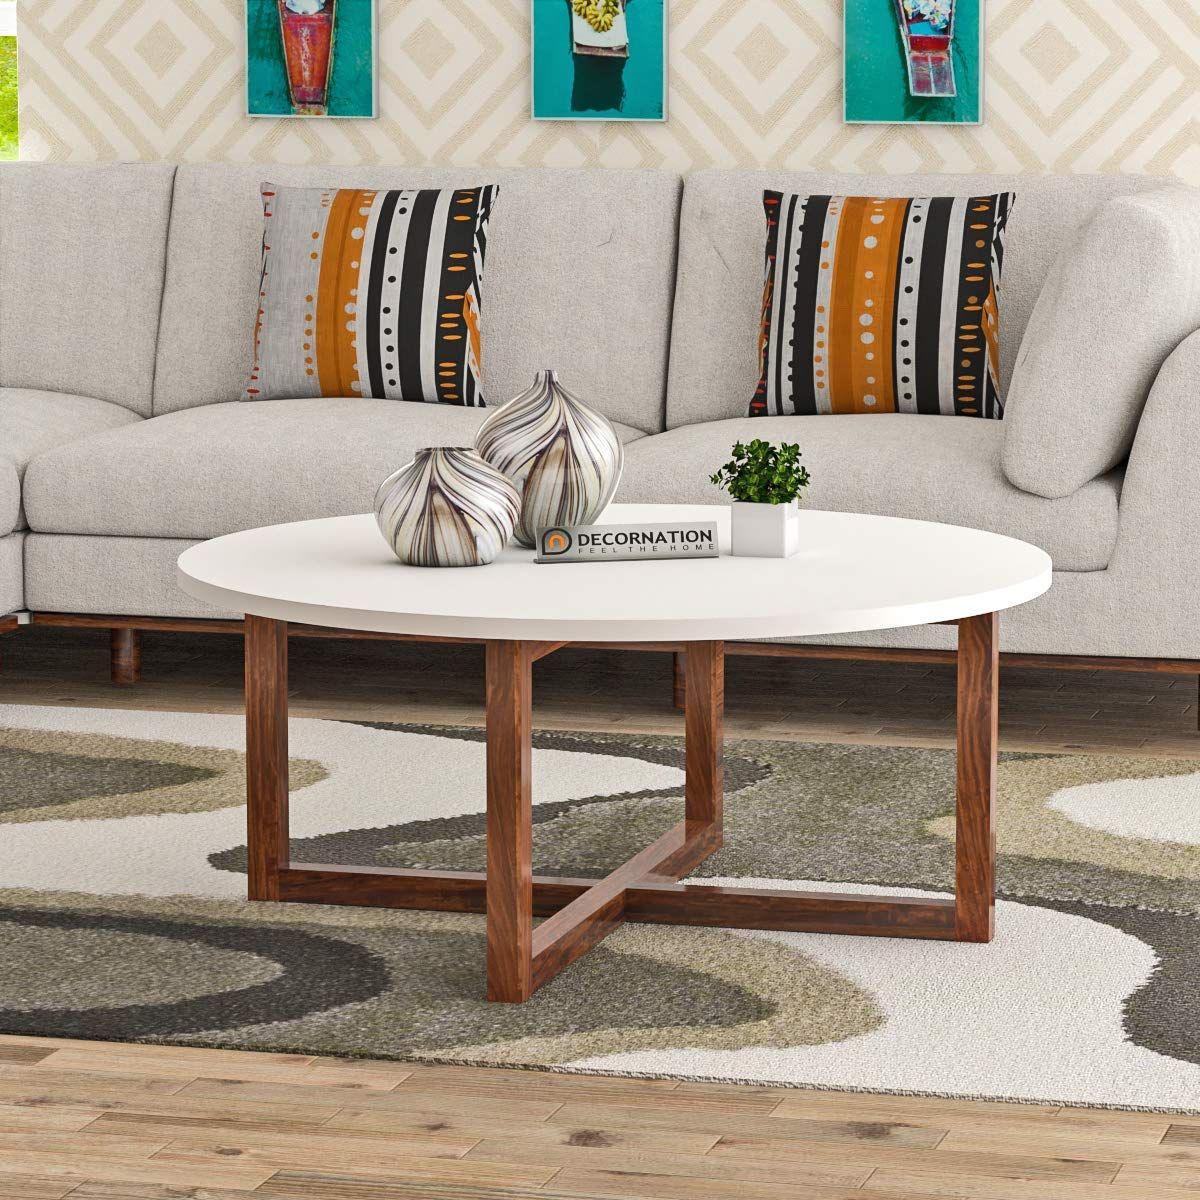 Wooden Mdf Round Coffee Table With Solid Wood Legs – White Throughout Wood Coffee Tables (View 9 of 15)